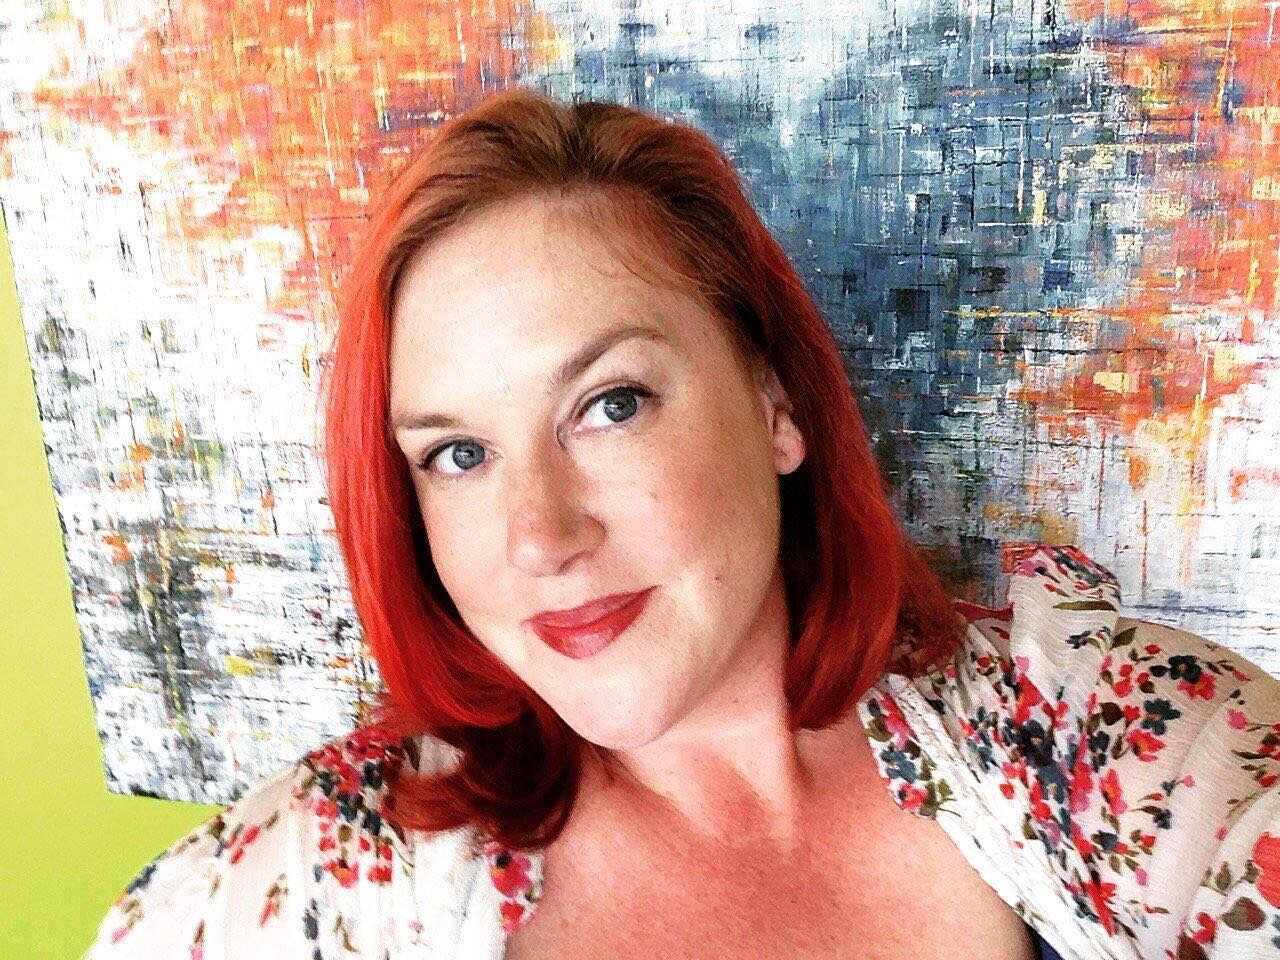 INTRODUCING&hellip;

CHRISTY BALDUF (SHE/THEY) MSHS, CLC, POSTPARTUM DOULA

Christy is a queer neurodivergent mother who raised her children in a non-traditional family. She believes parenthood is an exercise in deep self discovery and attunement to 